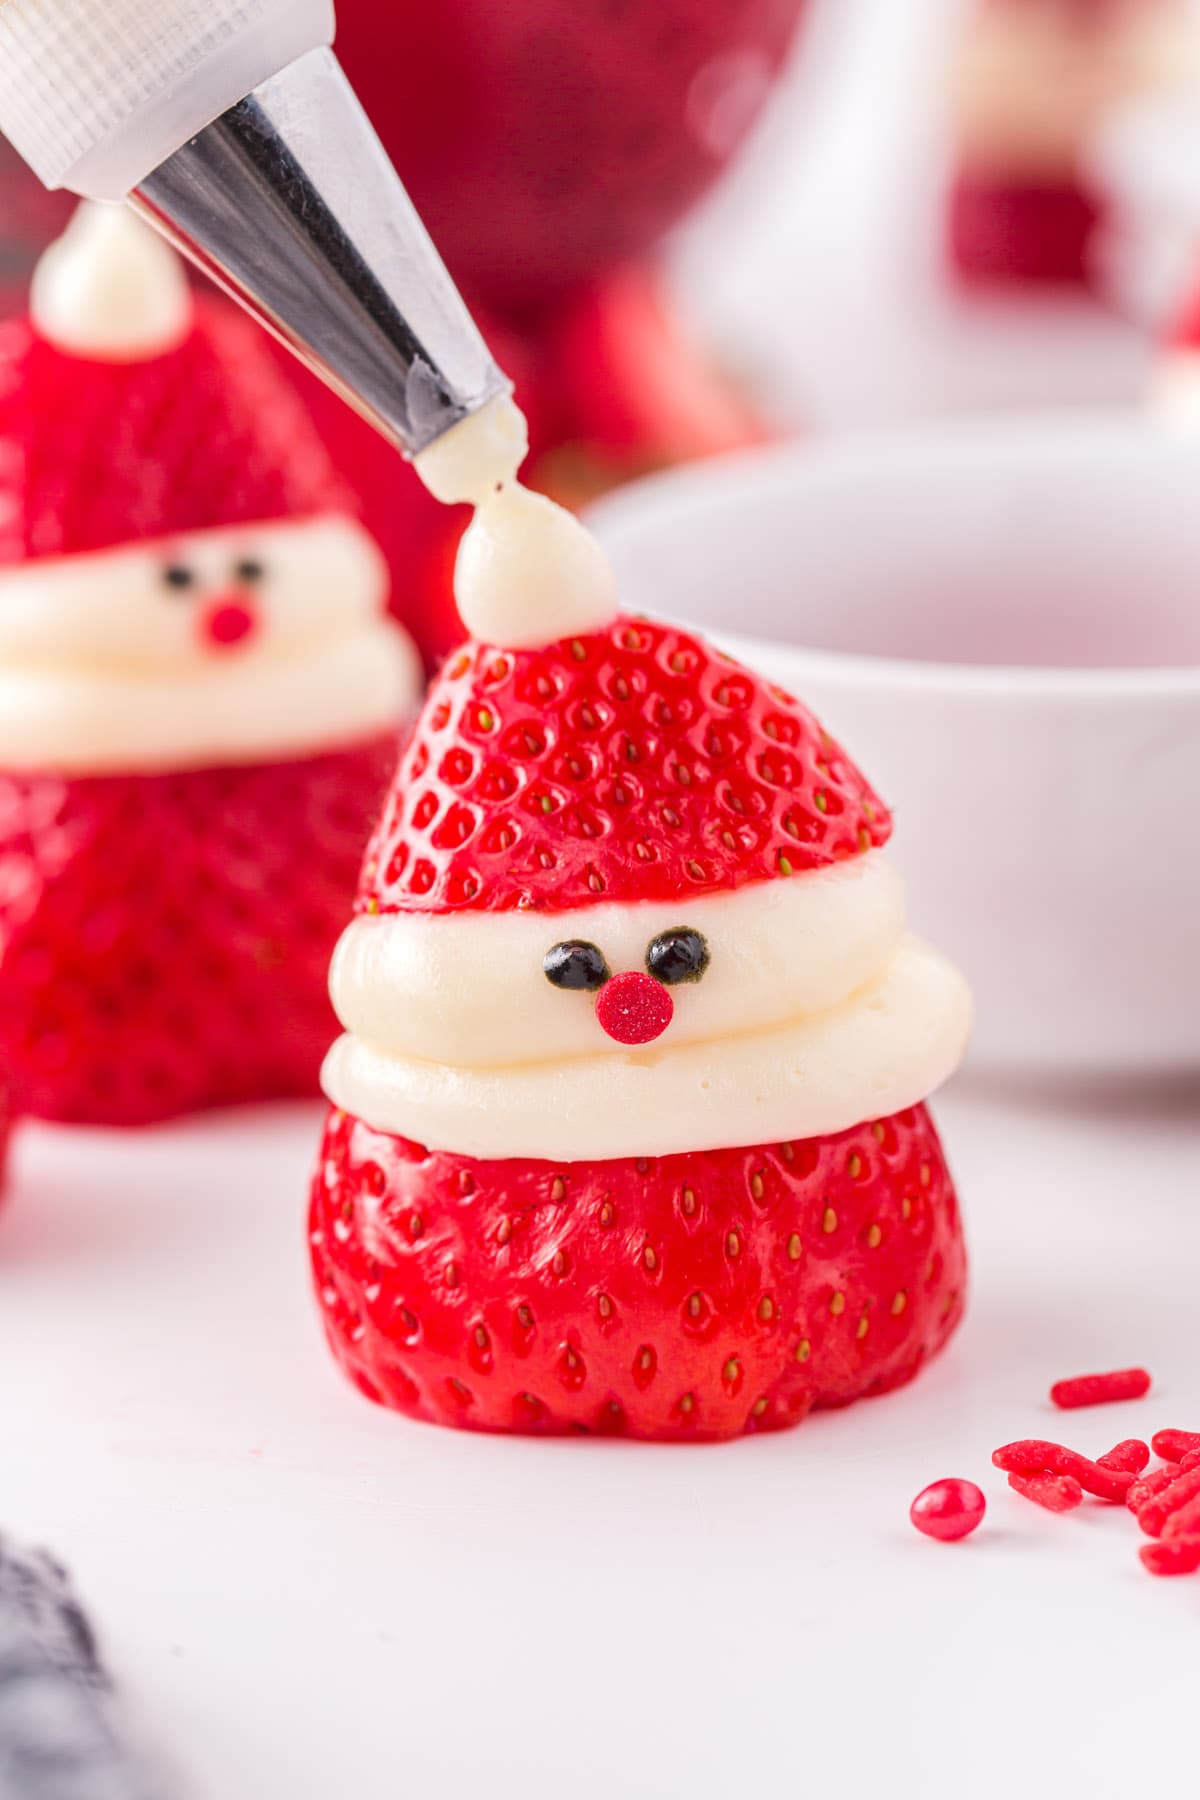 Top each swirl with a Santa hat and pipe a dot of frosting onto the tips of each hat to create the pom pom